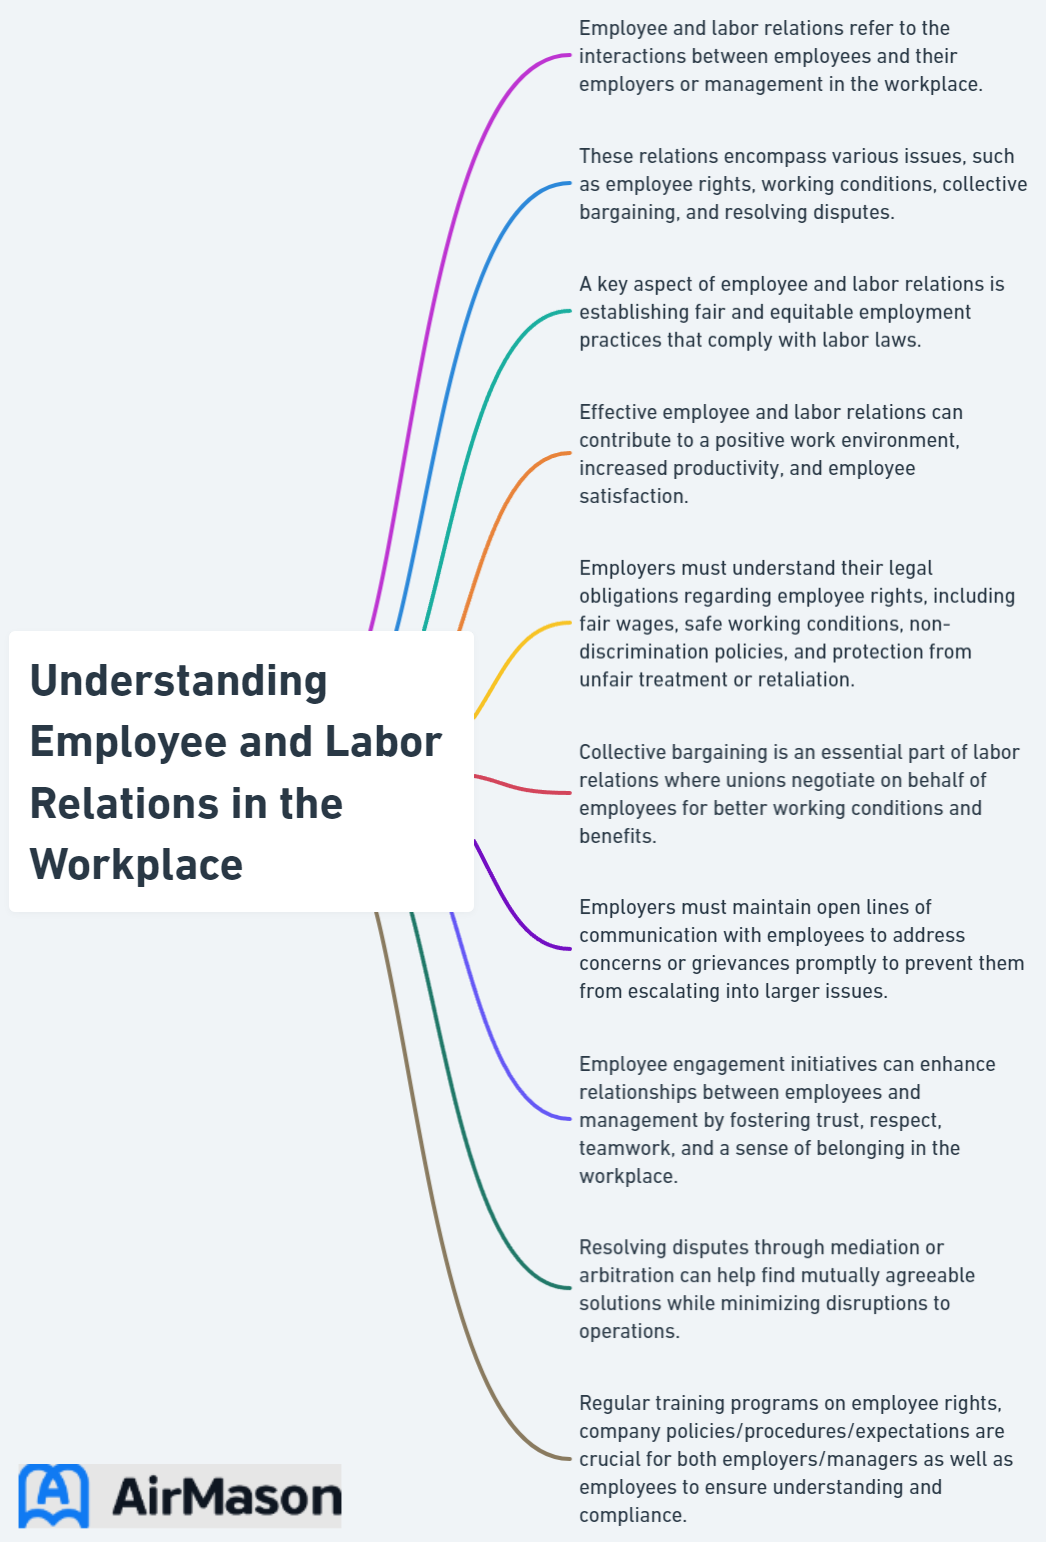 Understanding Employee and Labor Relations in the Workplace